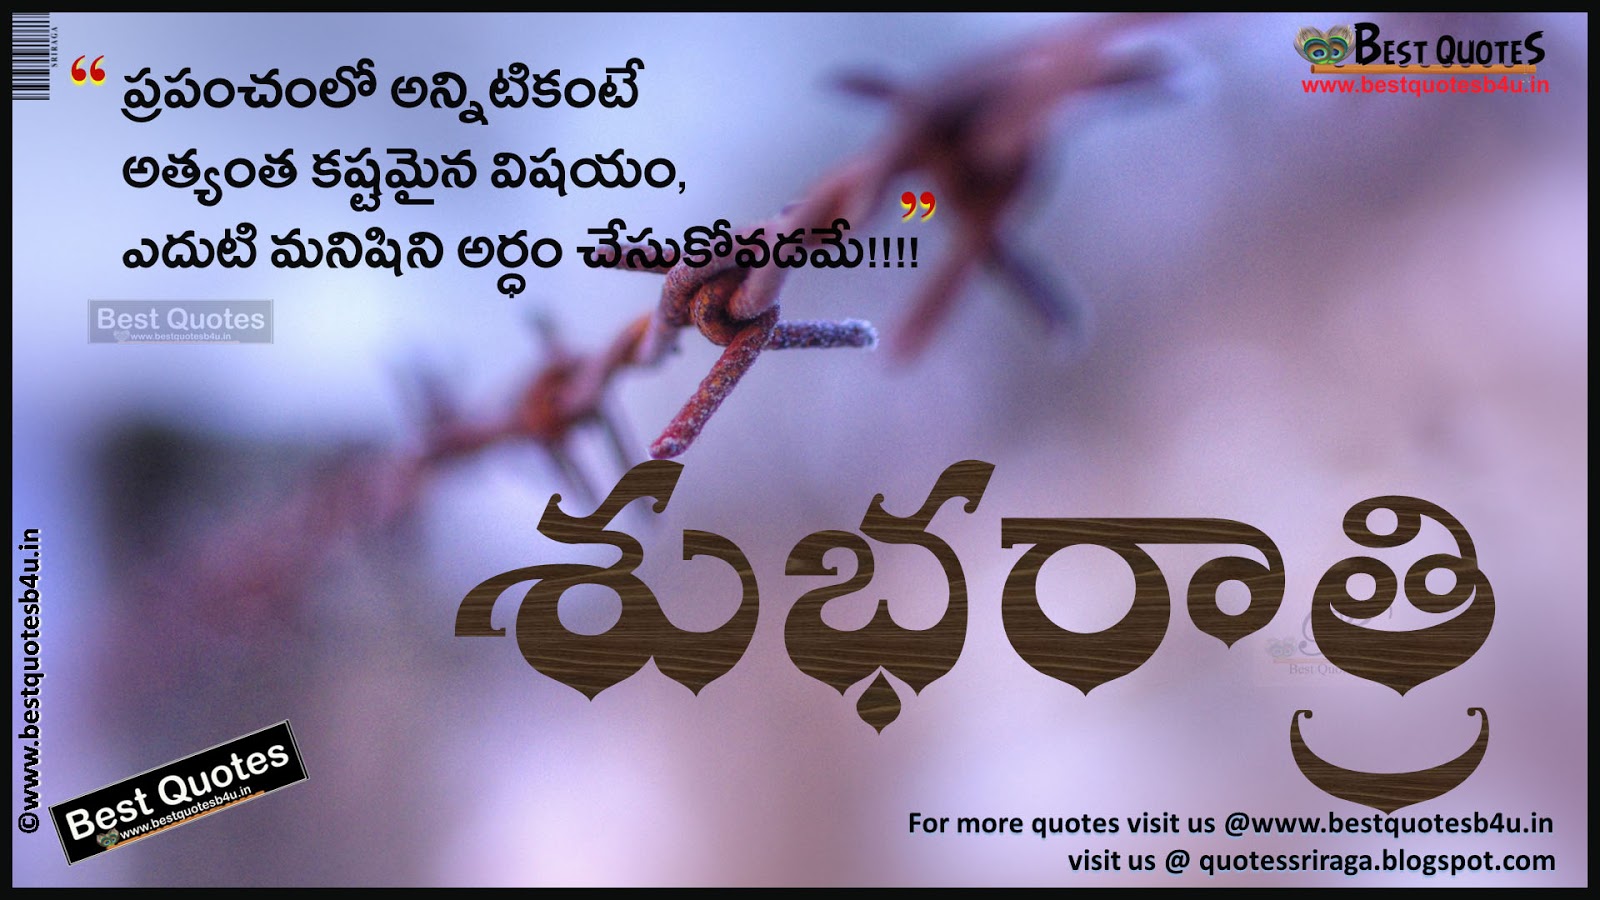 Telugu Good night messages understanding the life quotes | QUOTES ...